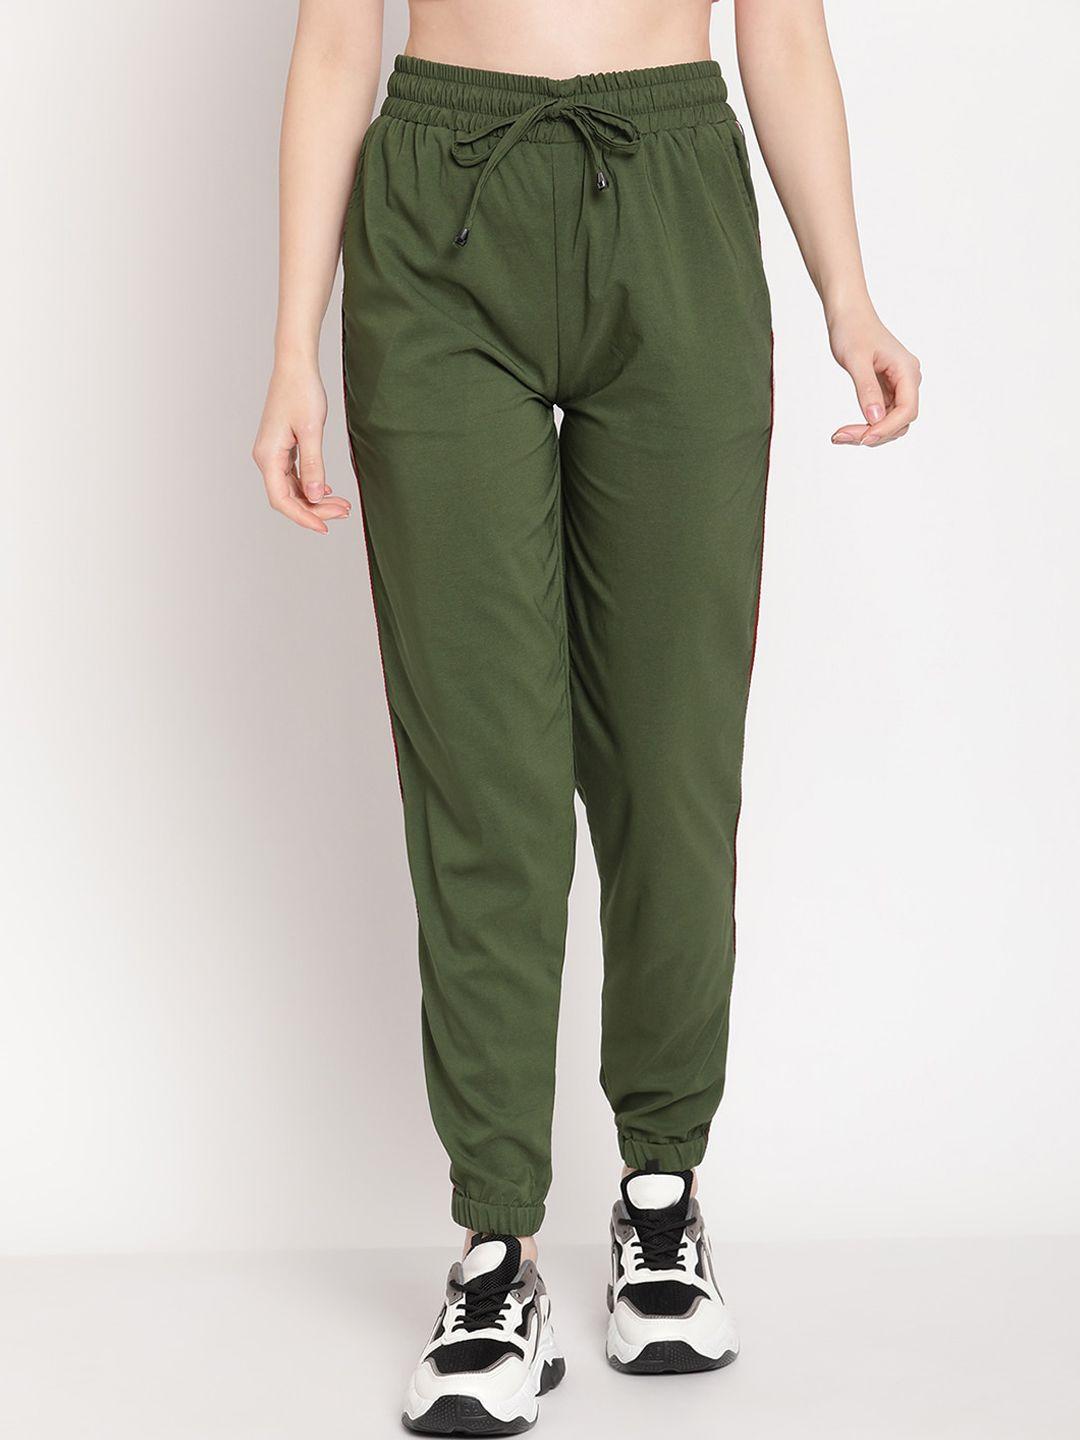 tag 7 women olive green high-rise joggers